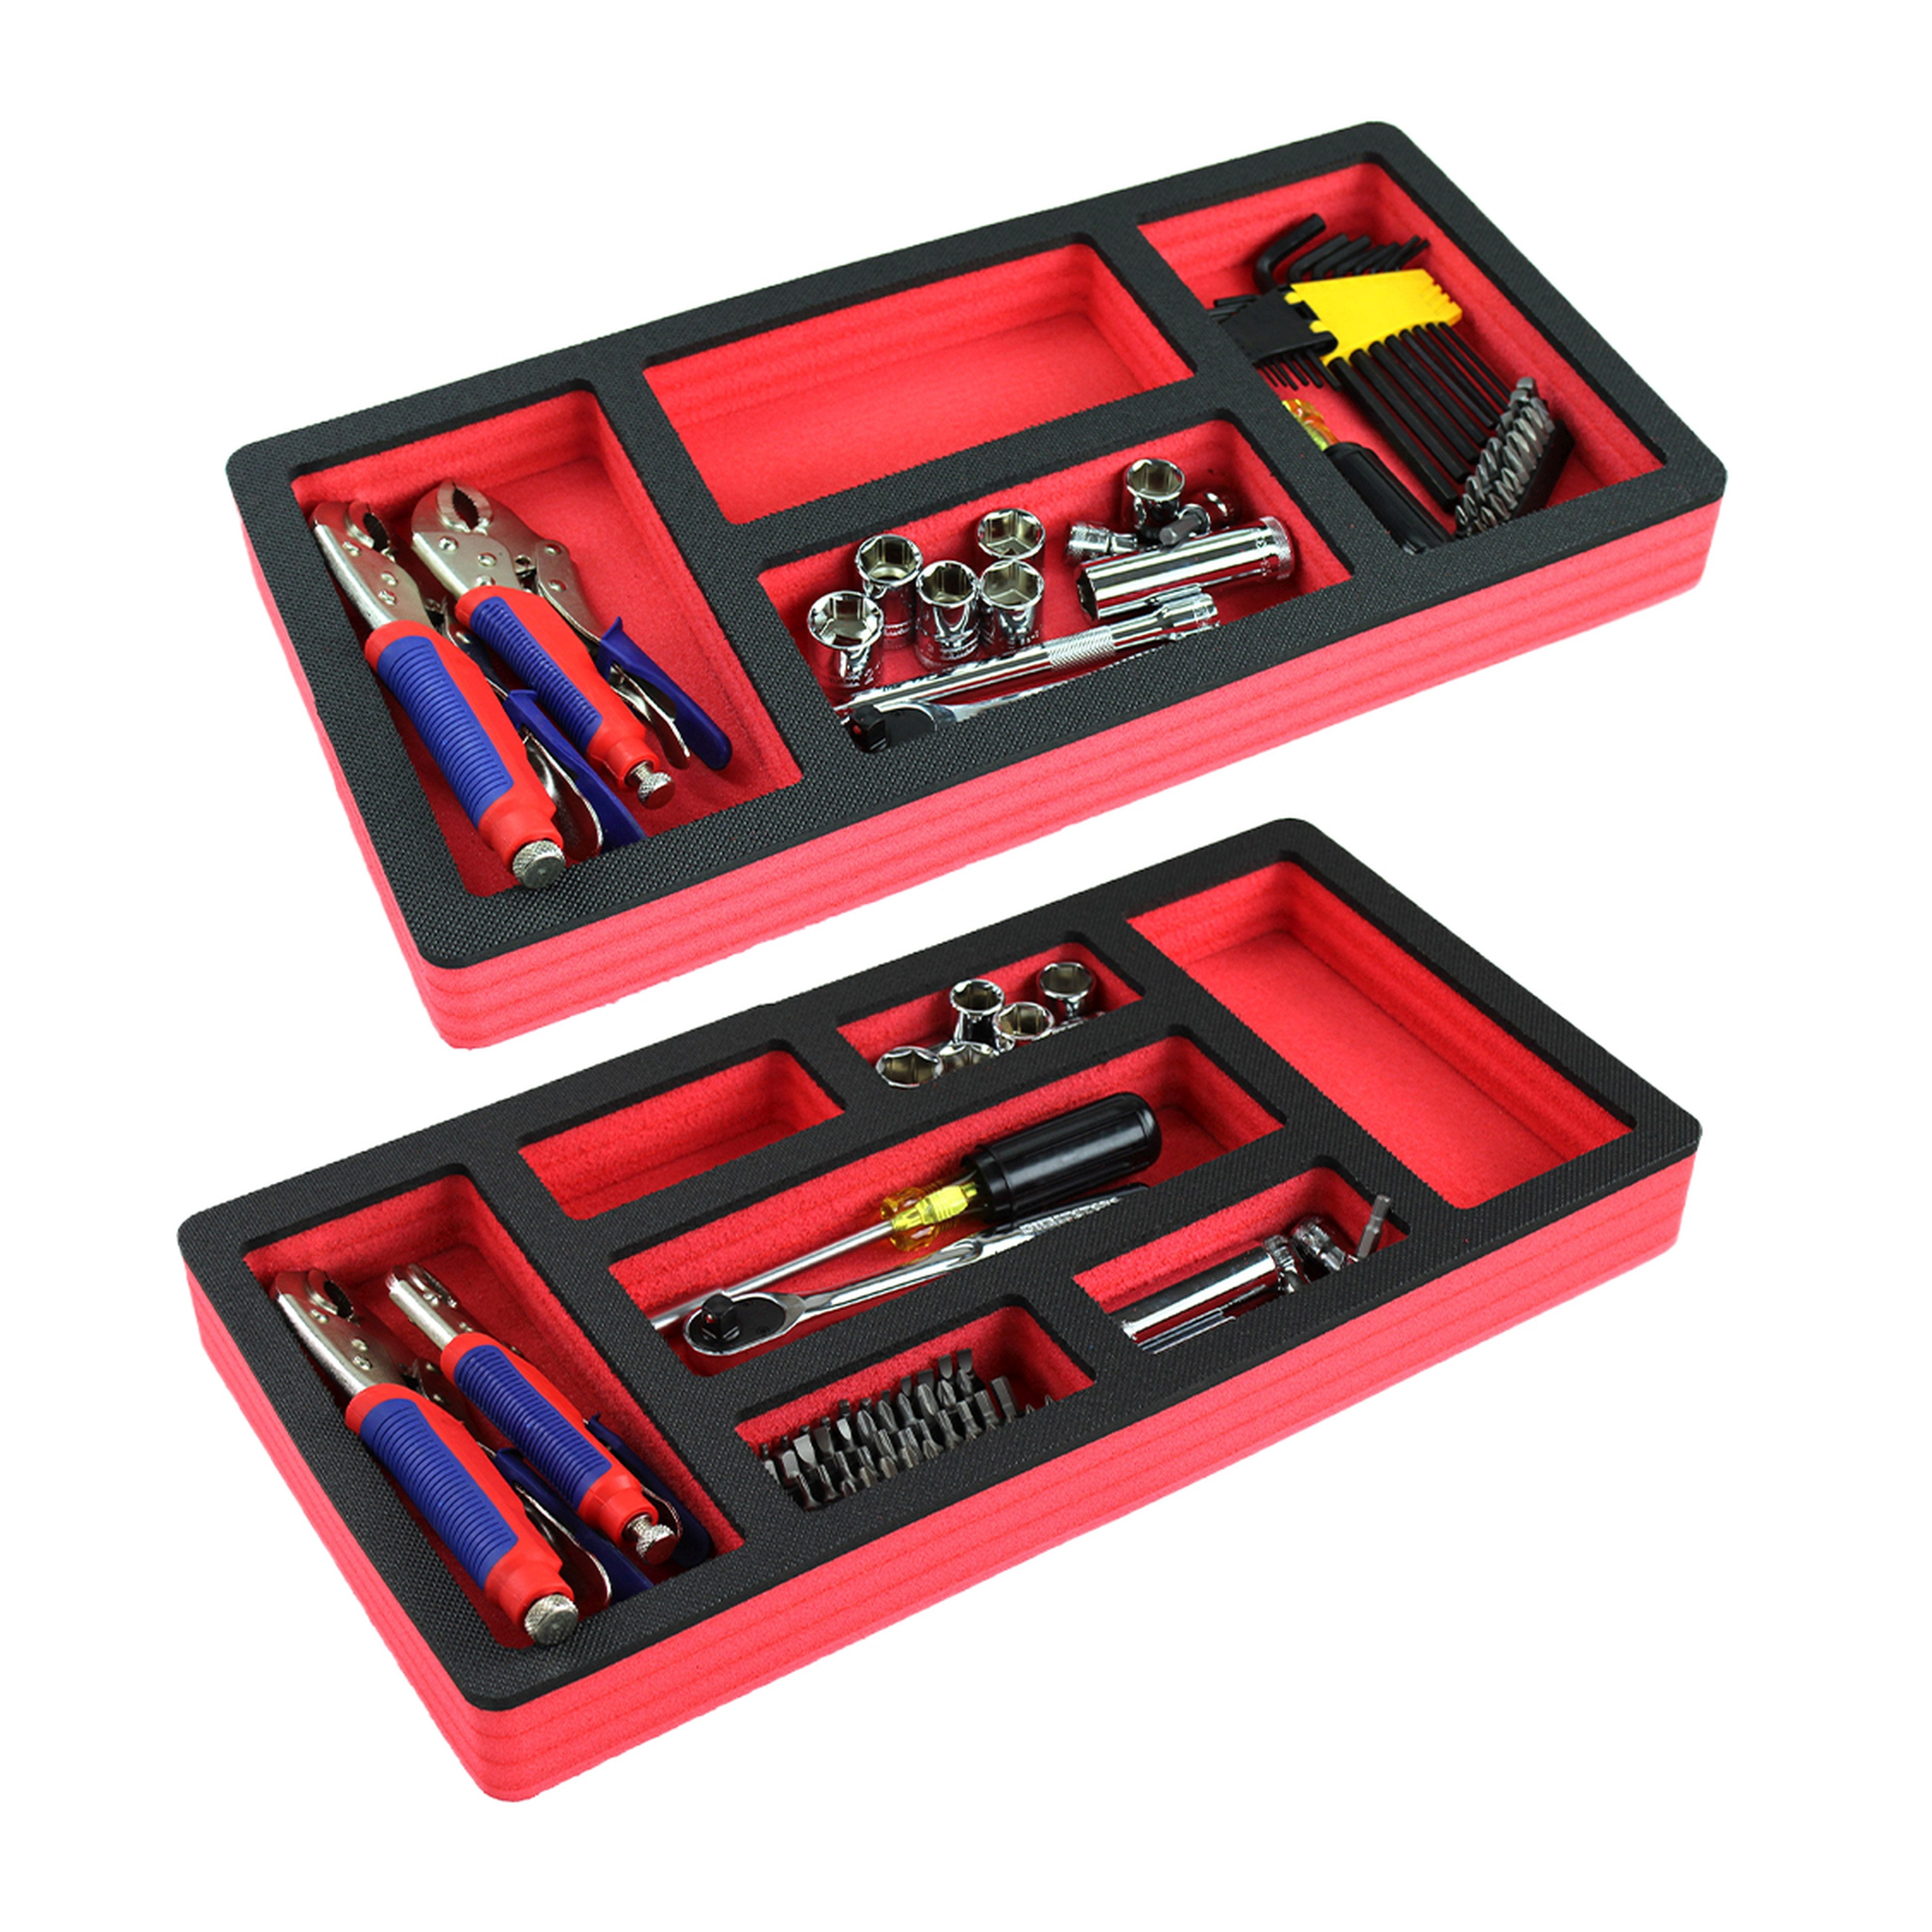 Tool Drawer Organizer 2-Piece Insert Set Red and Black Durable Foam Non-Slip Anti-Rattle Bin Holder Tray 20 x 10 Inches Large Pockets Fits Craftsman Husky Kobalt Milwaukee and Many Others